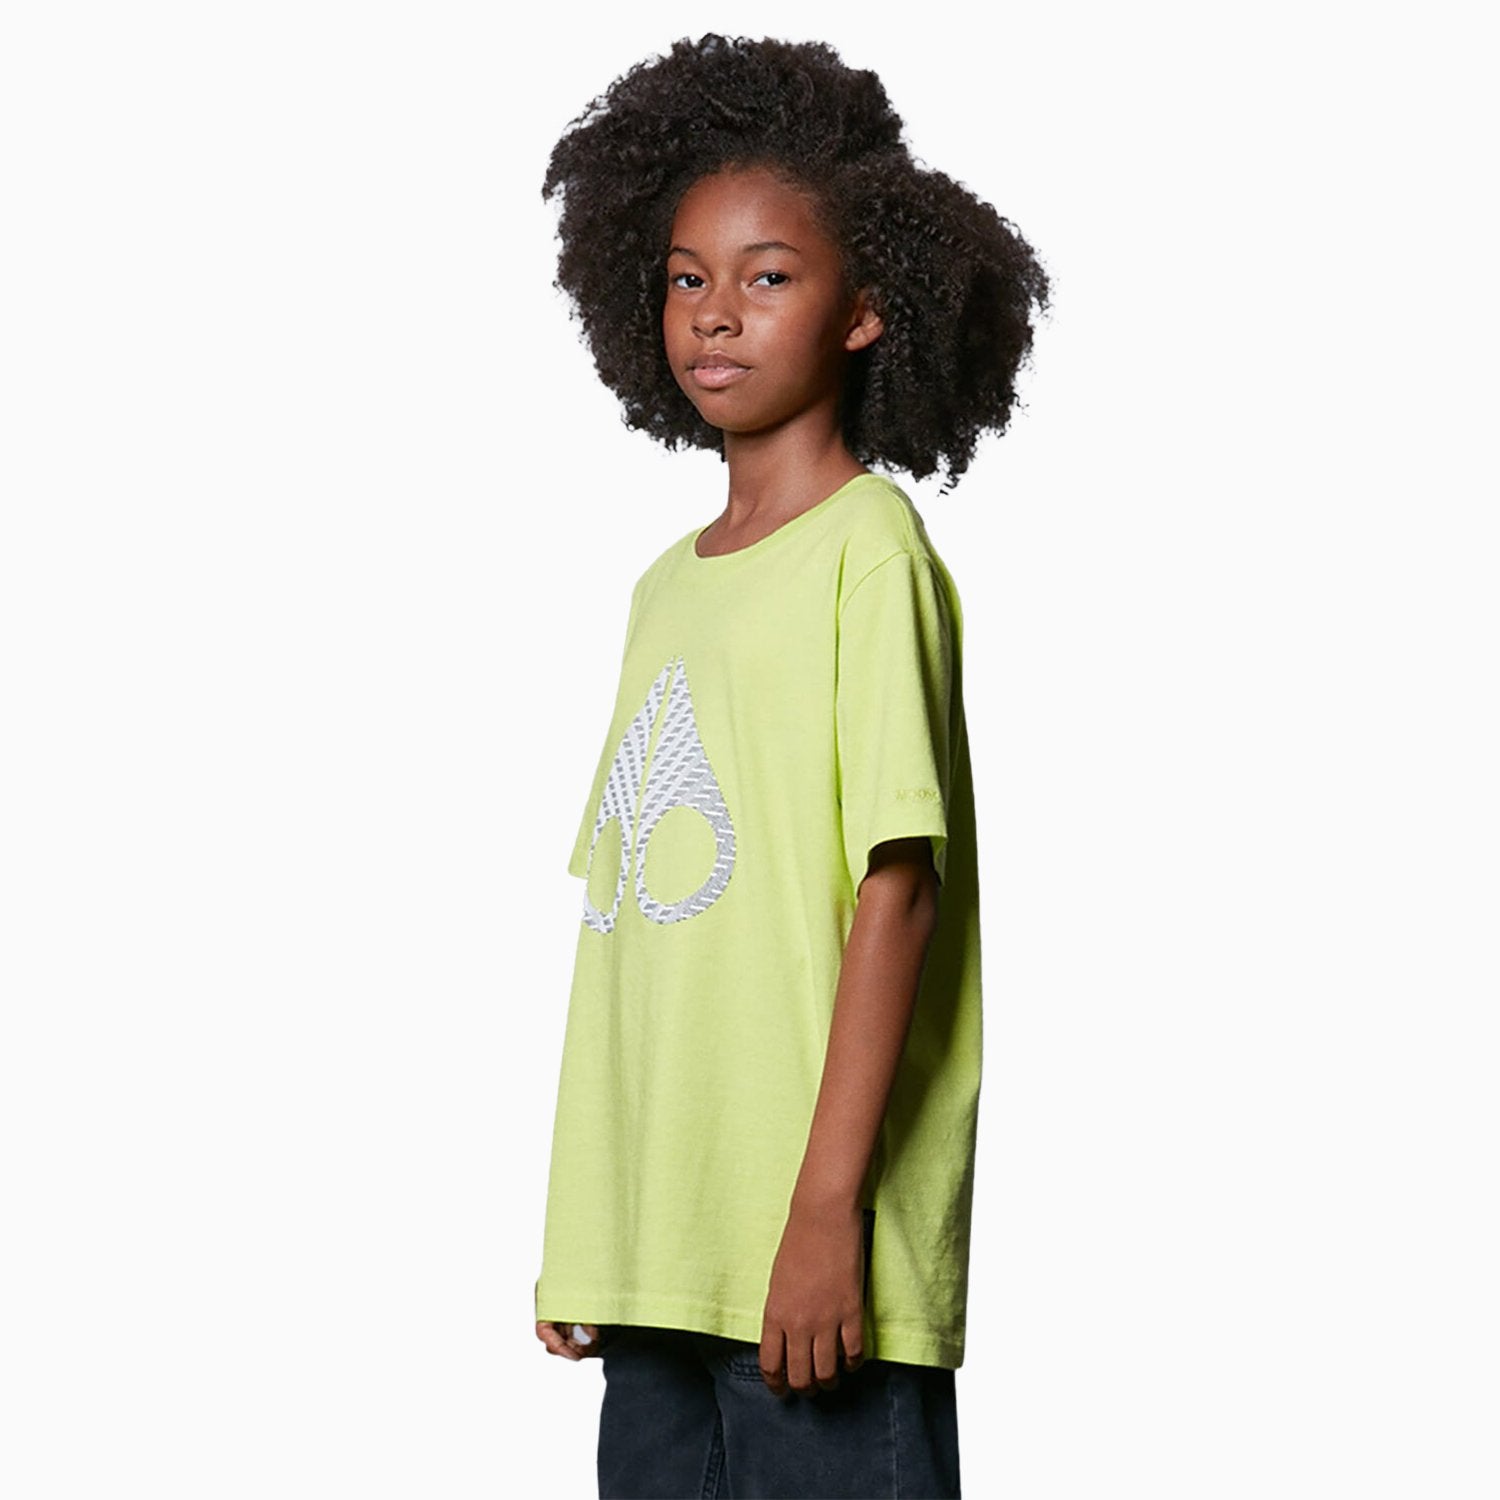 Moose Knuckles Kid's Eagle T-Shirt - Color: Neon Green - Kids Premium Clothing -